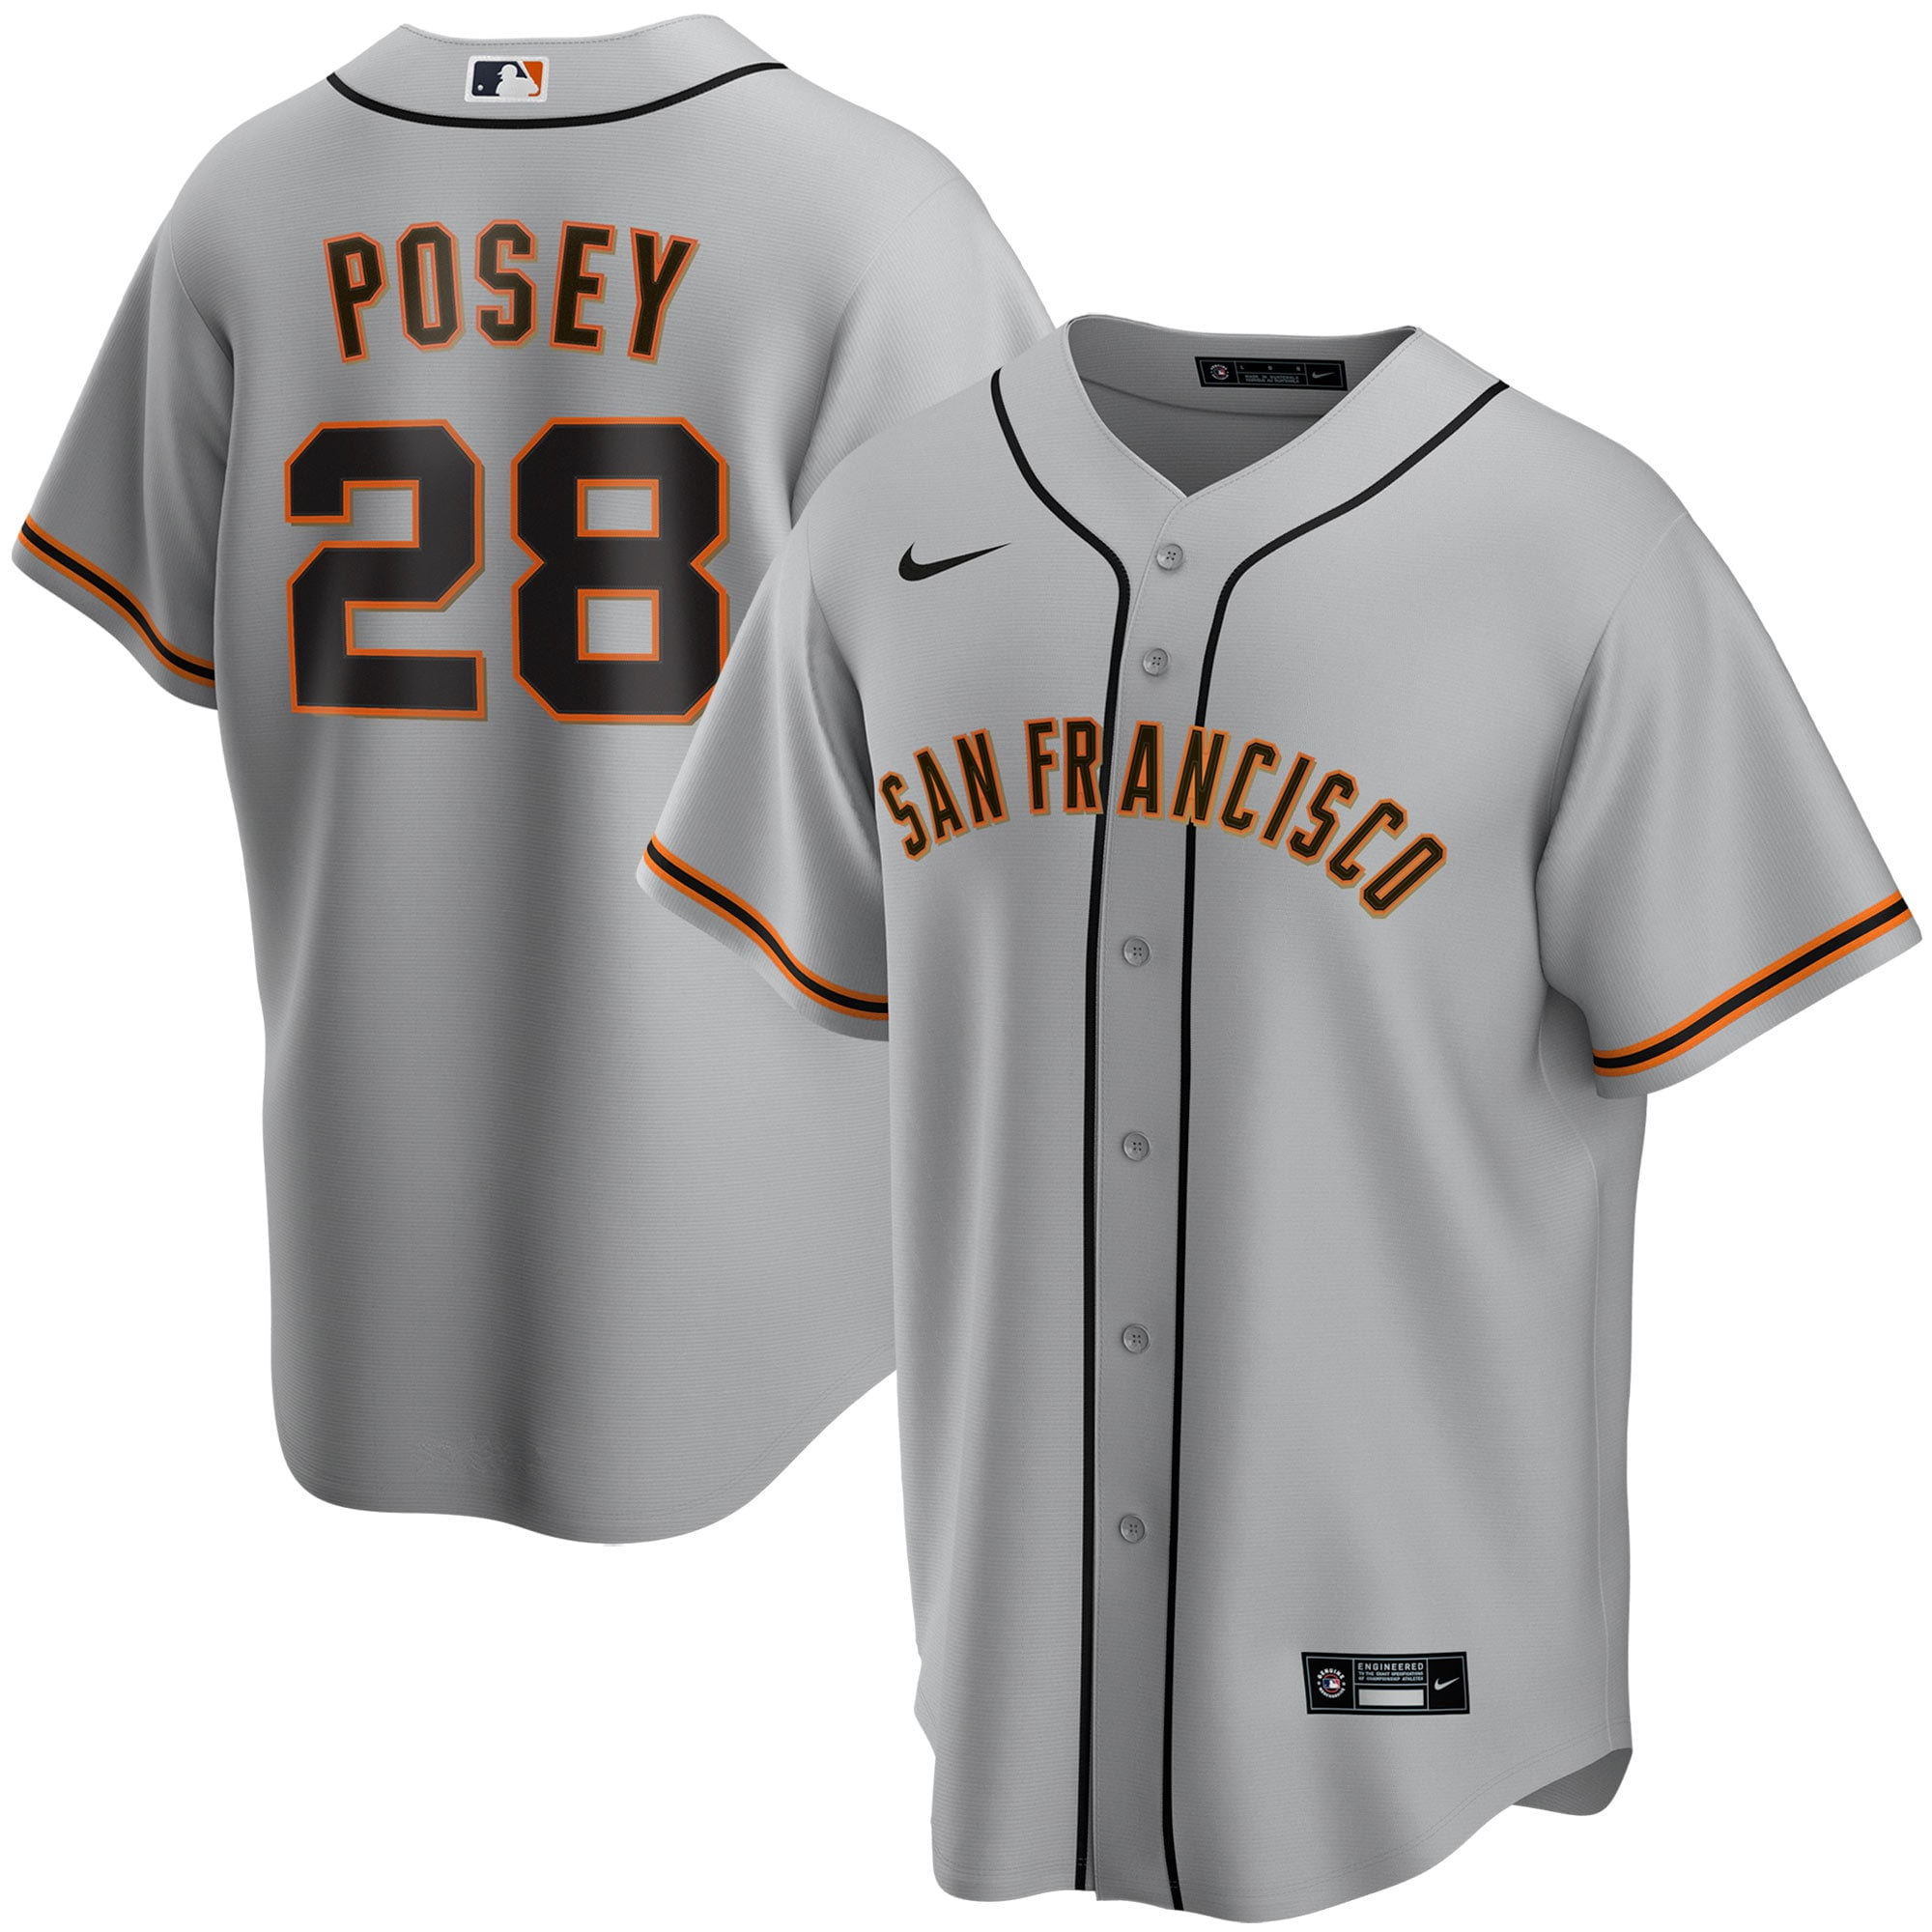 buster posey women's jersey